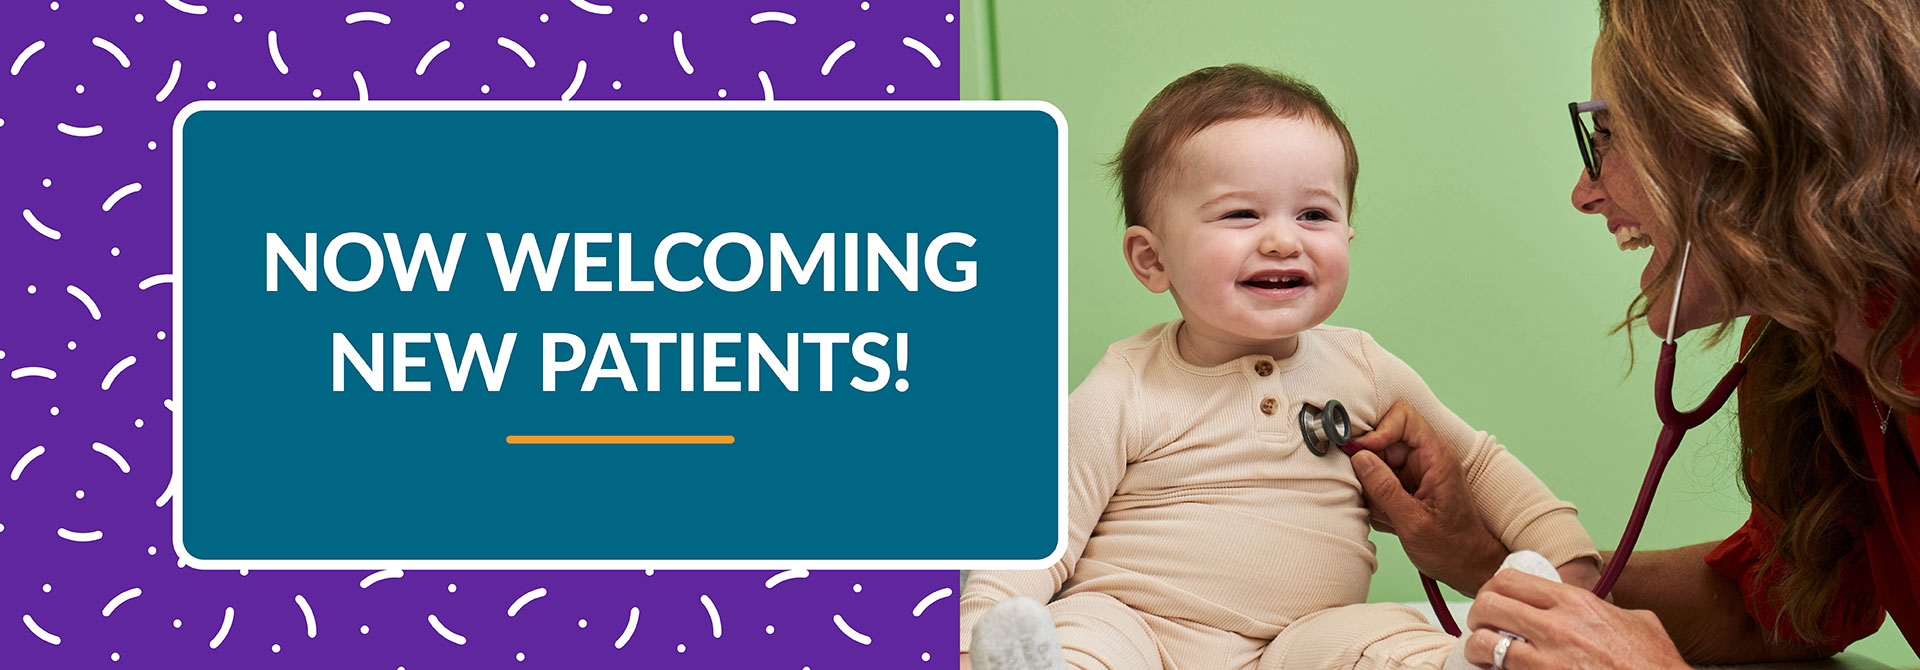 Now Welcoming New Patients!